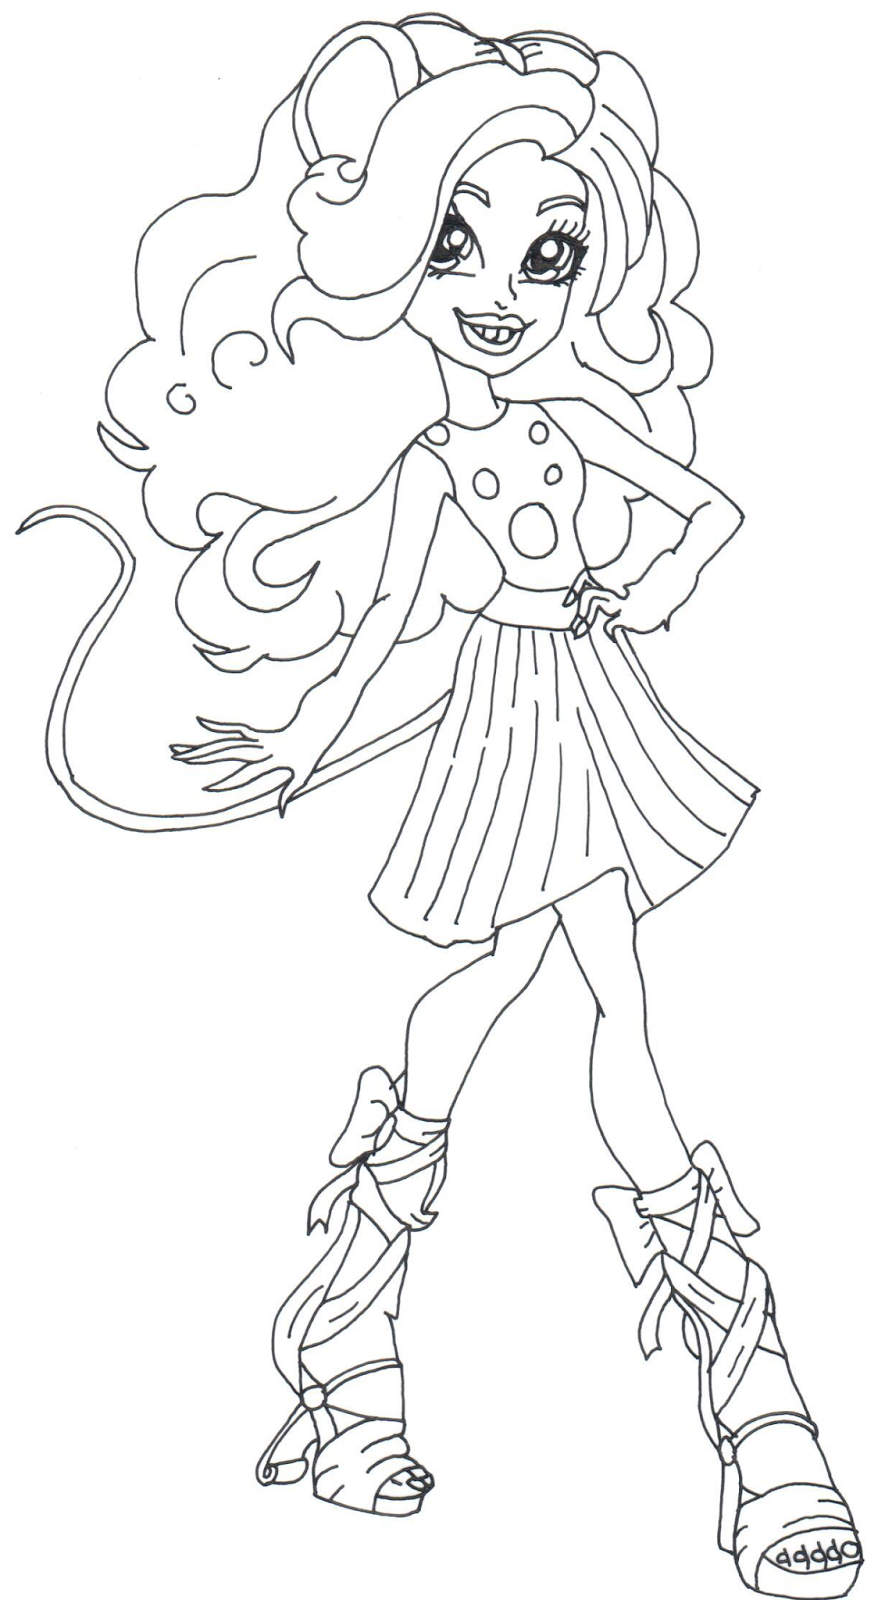 Mouscedes King Monster High Coloring Page